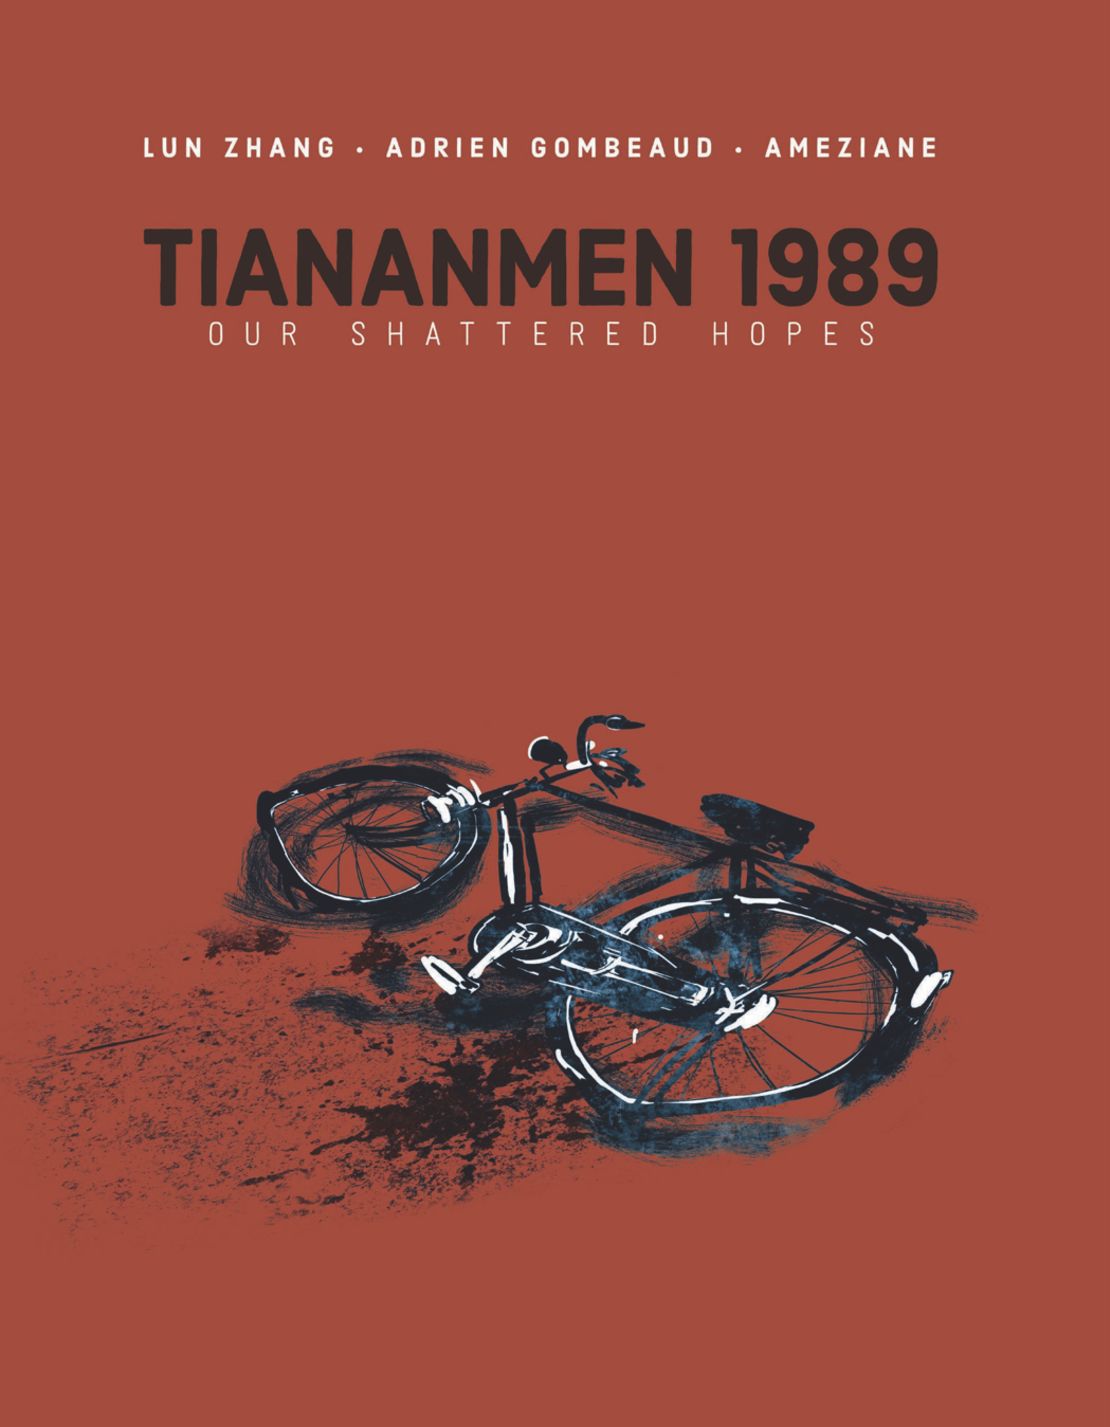 "Tiananmen 1989: Our Shattered Hopes" cover. 